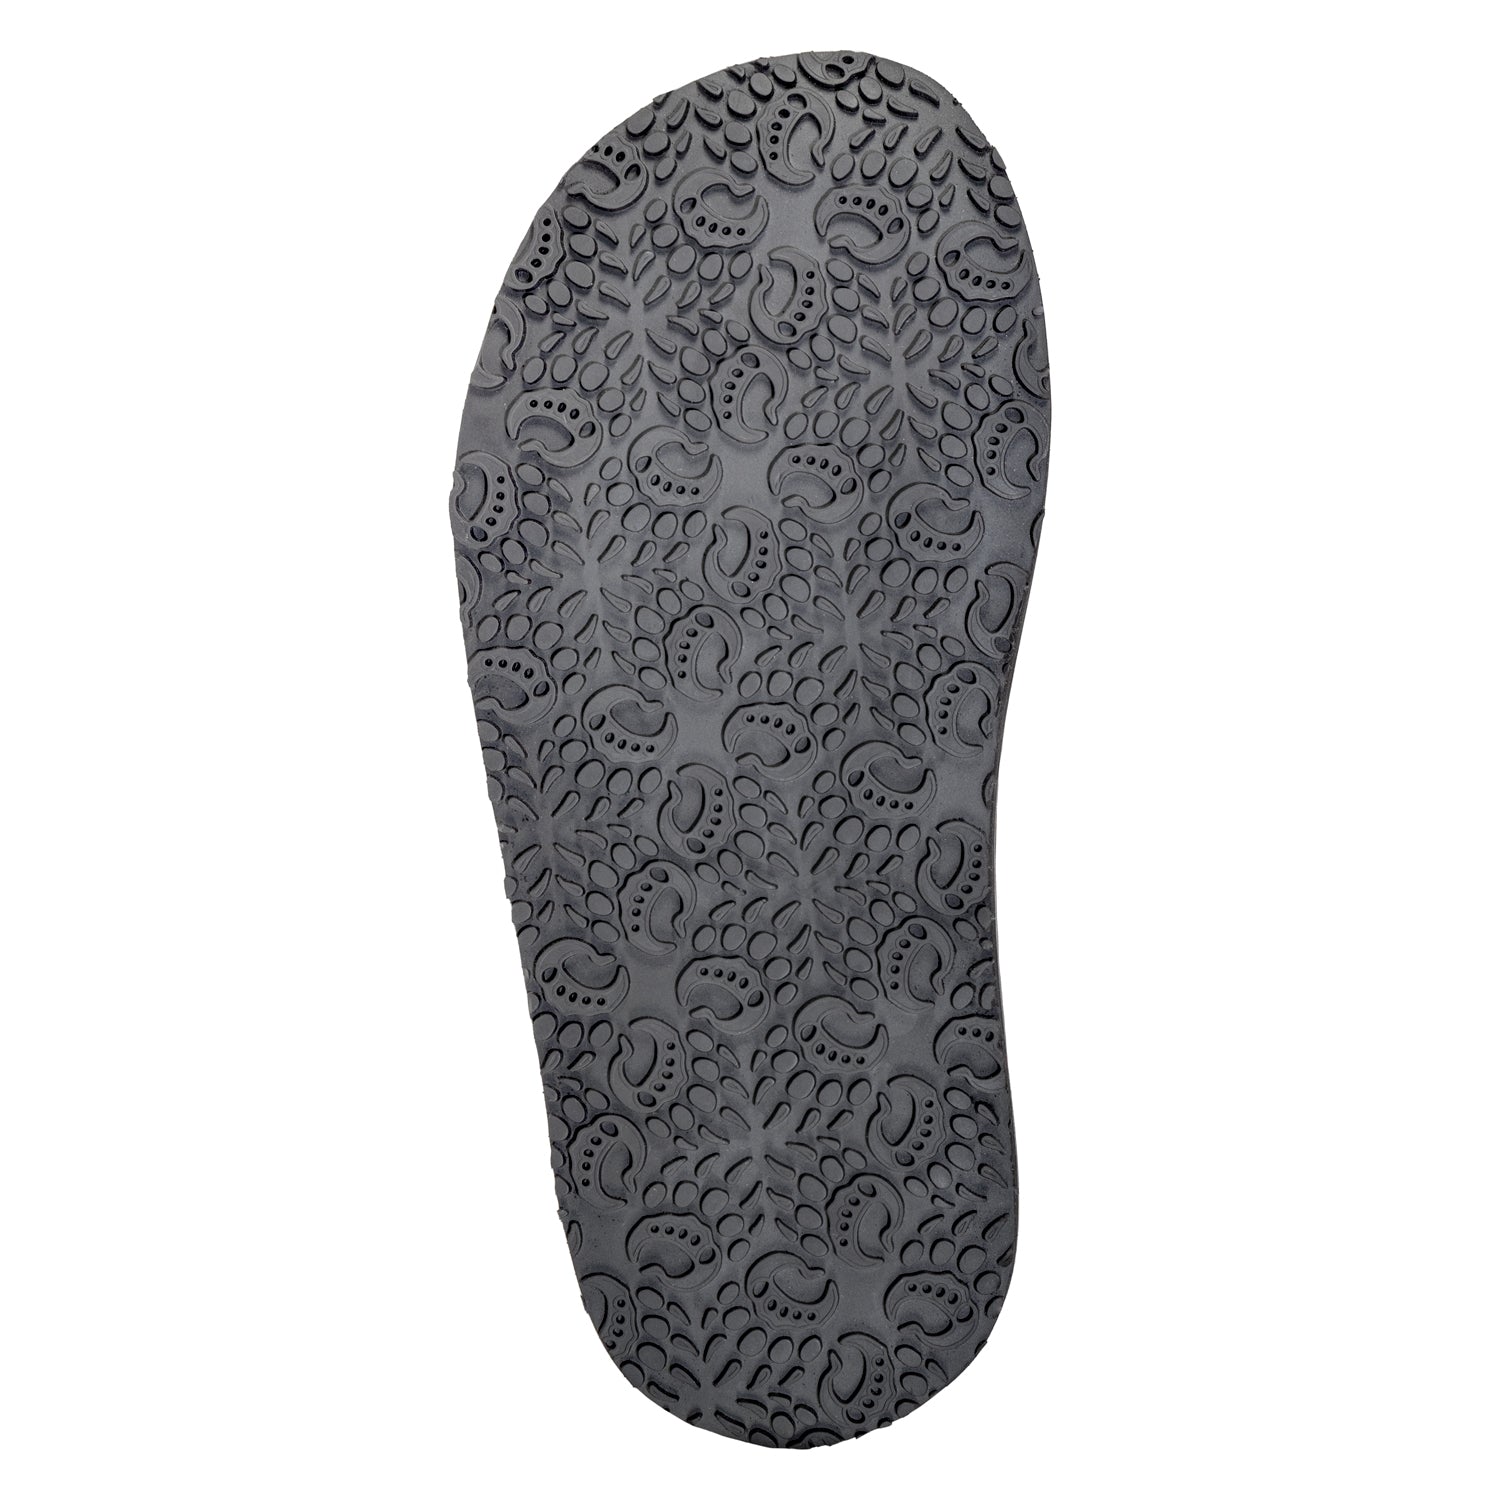 Close-up of a black Bearfoot boot sole featuring a detailed paisley pattern for grip and a wide toe-box design.